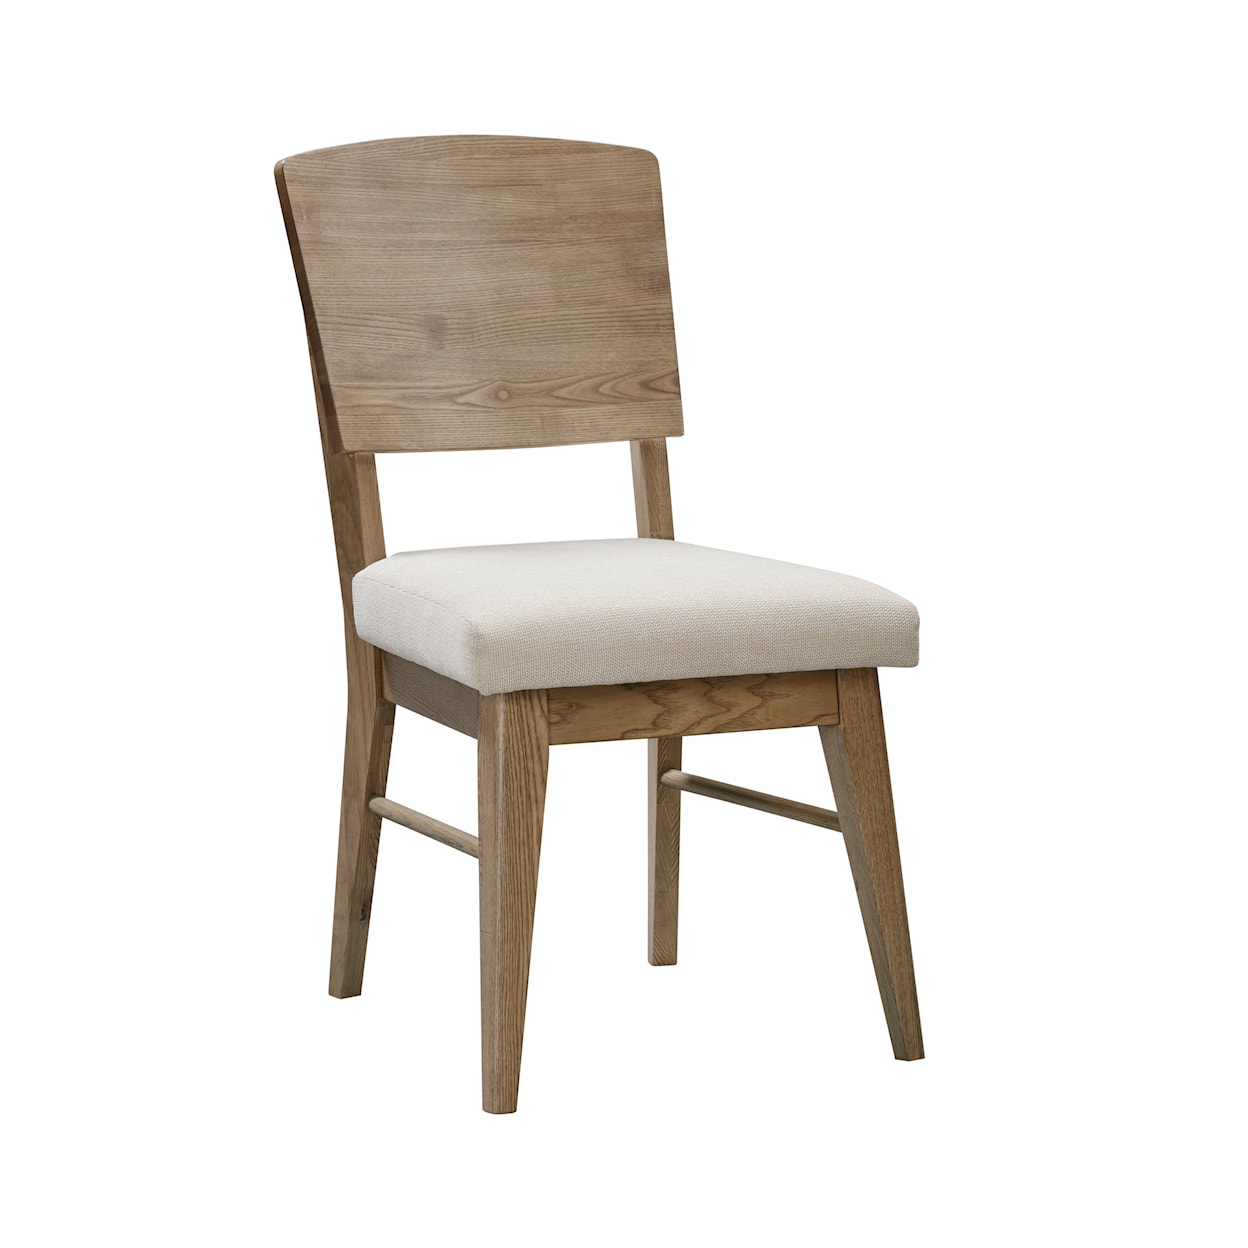 AAmerica Barbossa Panel Dining Chair with Upholstered Seat